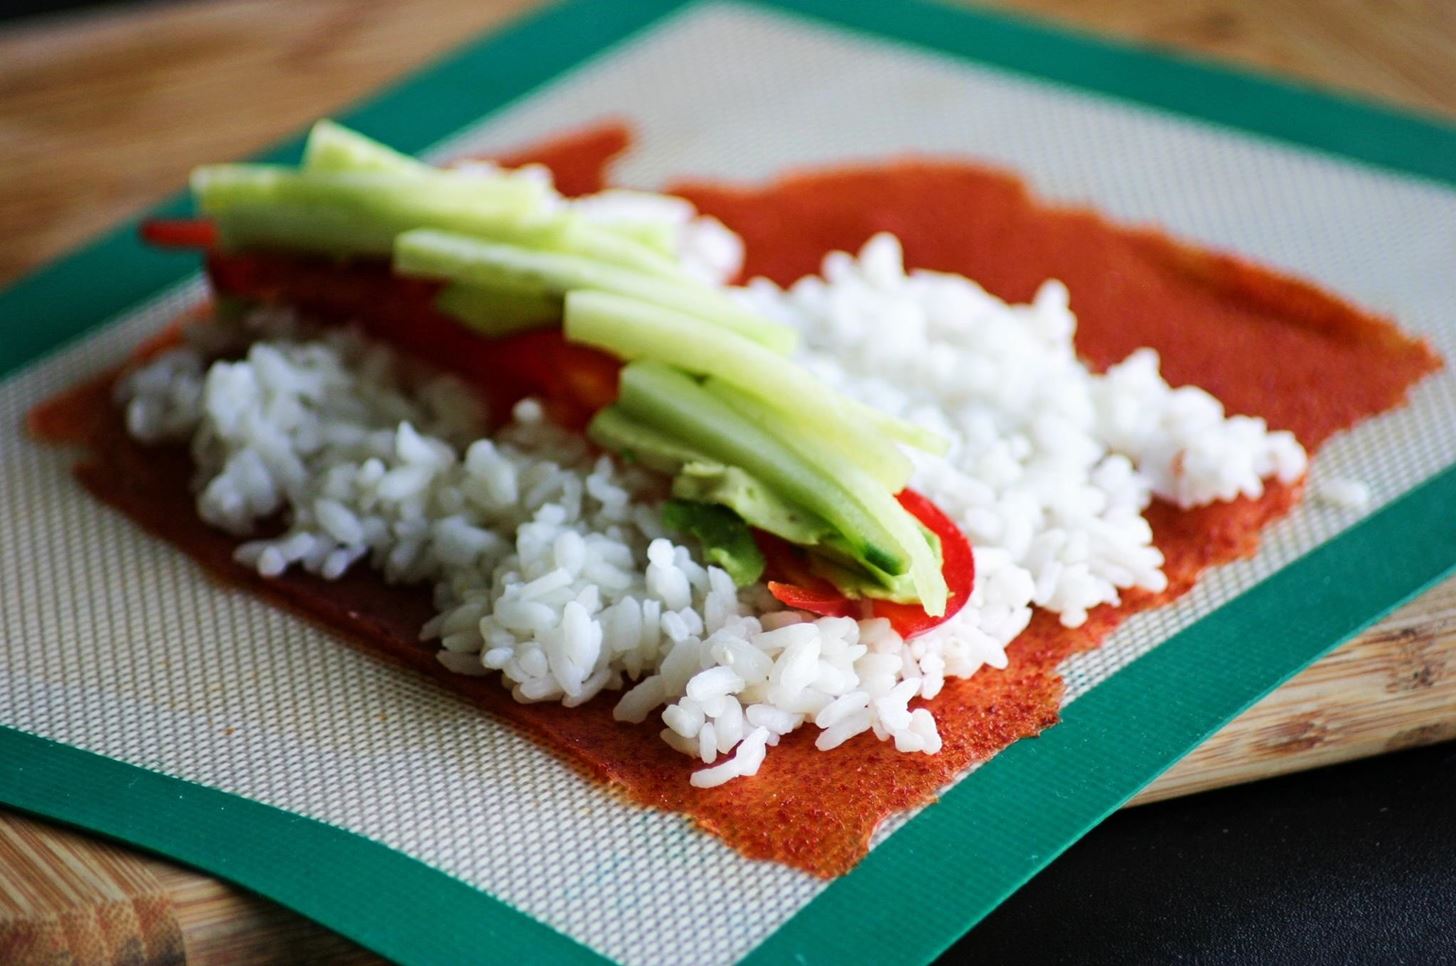 Tastes as Amazing as It Sounds: Make Sushi with Sriracha Instead of Seaweed